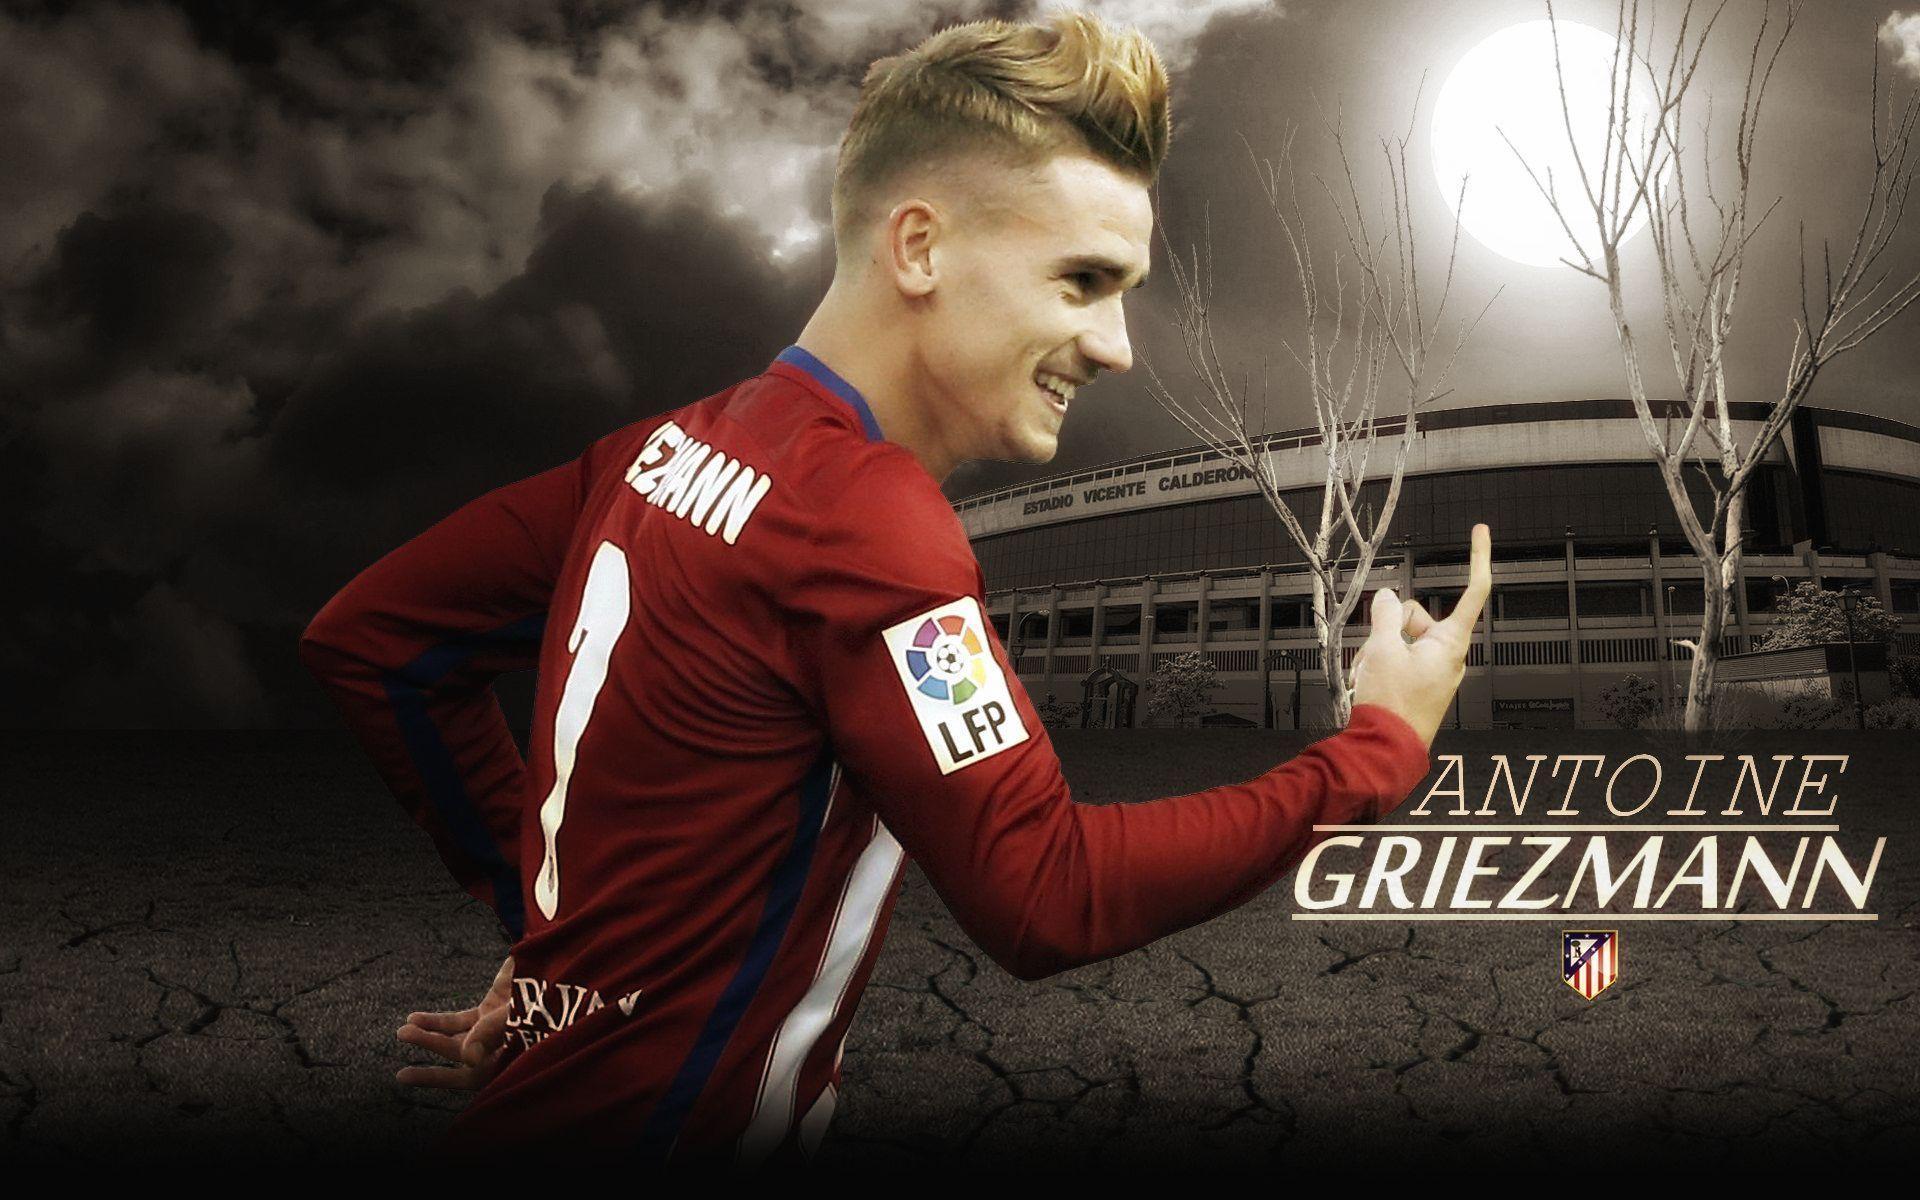 Wallpaper ID 401100  Sports Antoine Griezmann Phone Wallpaper Soccer  French 1080x1920 free download